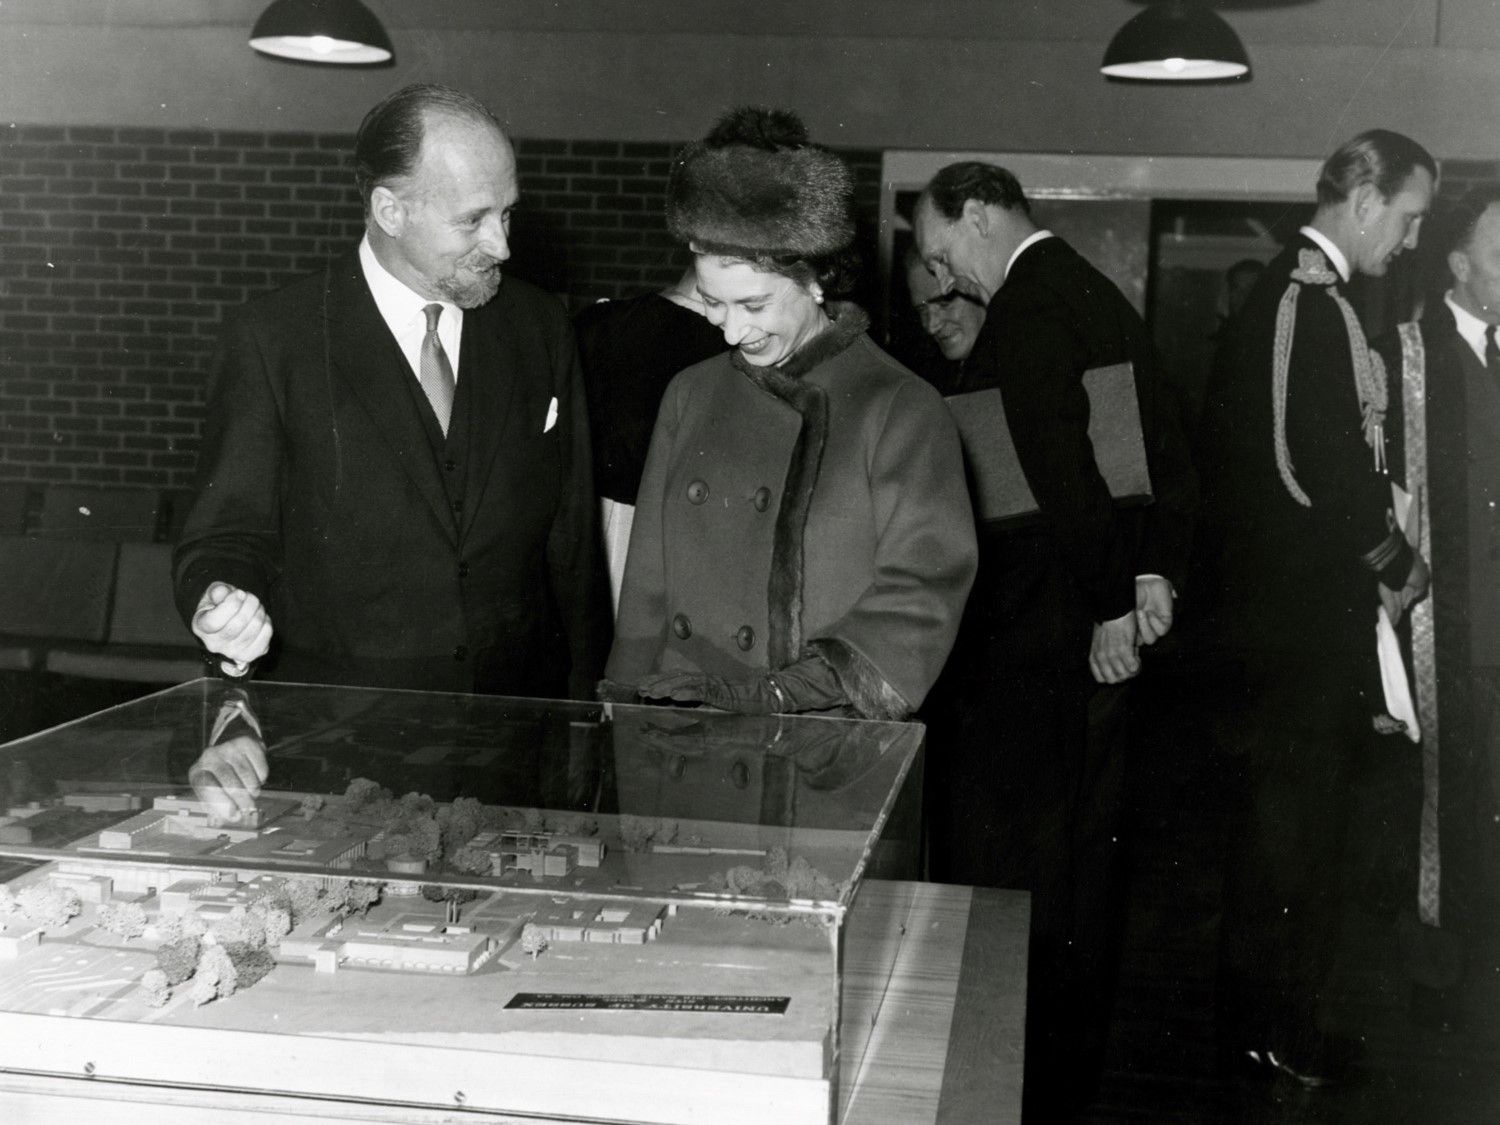 During a visit to open the campus library on 13 November 1964, Her Majesty talks with Basil Spence as he shows her a model of campus, which is still on display in Bramber House.